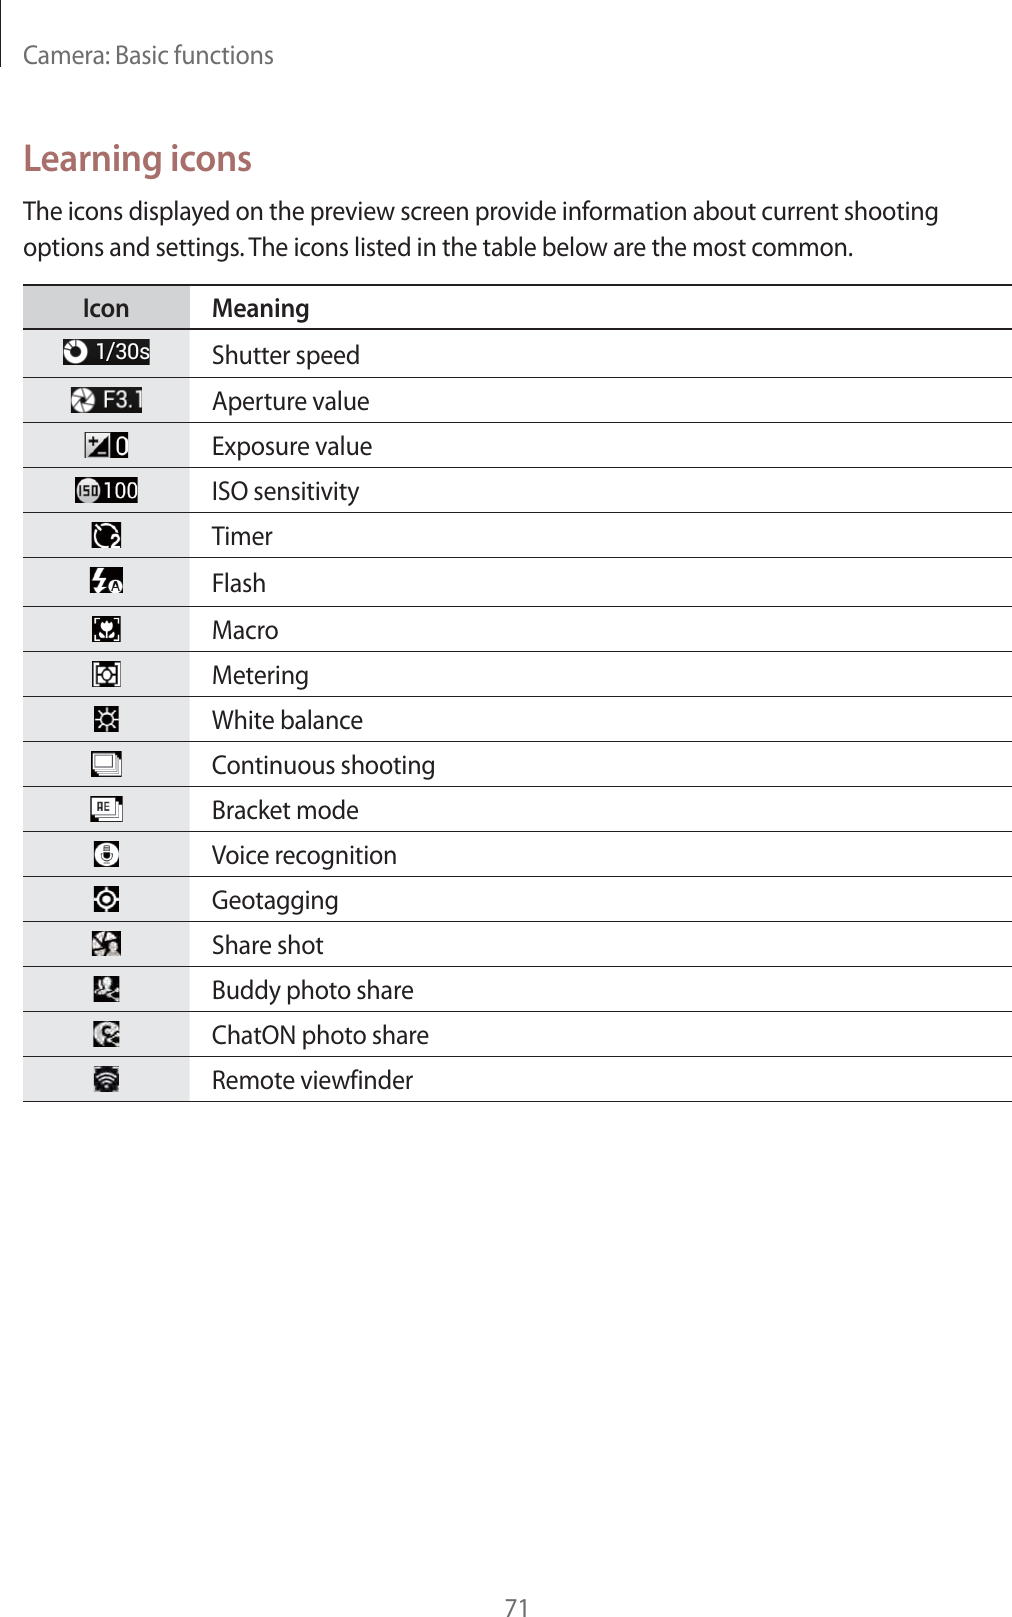 Camera: Basic functions71Learning iconsThe icons displayed on the preview screen provide information about current shooting options and settings. The icons listed in the table below are the most common.Icon MeaningShutter speedAperture valueExposure valueISO sensitivityTimerFlashMacroMeteringWhite balanceContinuous shootingBracket modeVoice recognitionGeotaggingShare shotBuddy photo shareChatON photo shareRemote viewfinder